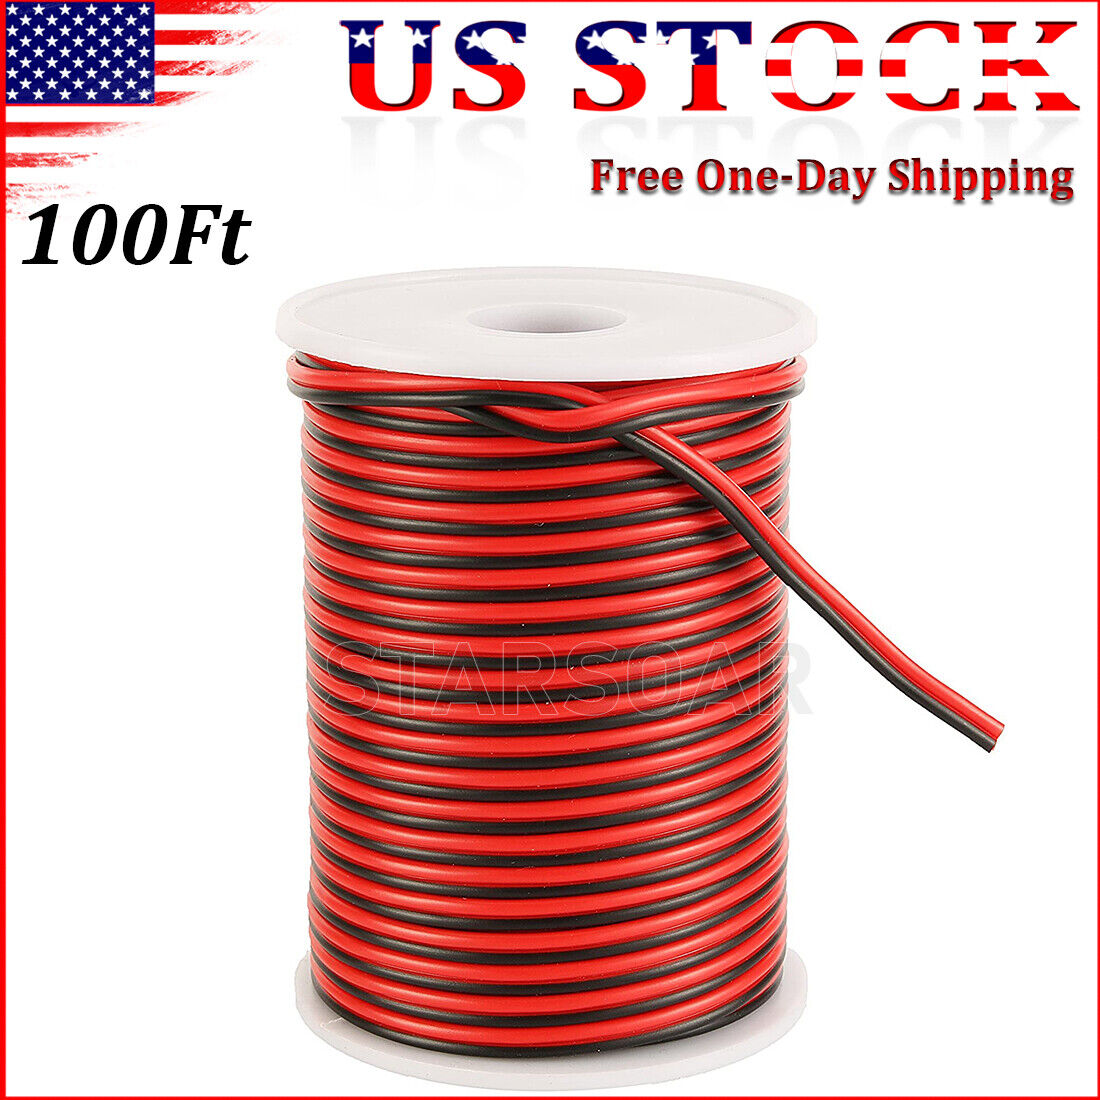 100Ft Red Black Marine Boat Wire 22# for LED Lights Wiring Harness Cable 